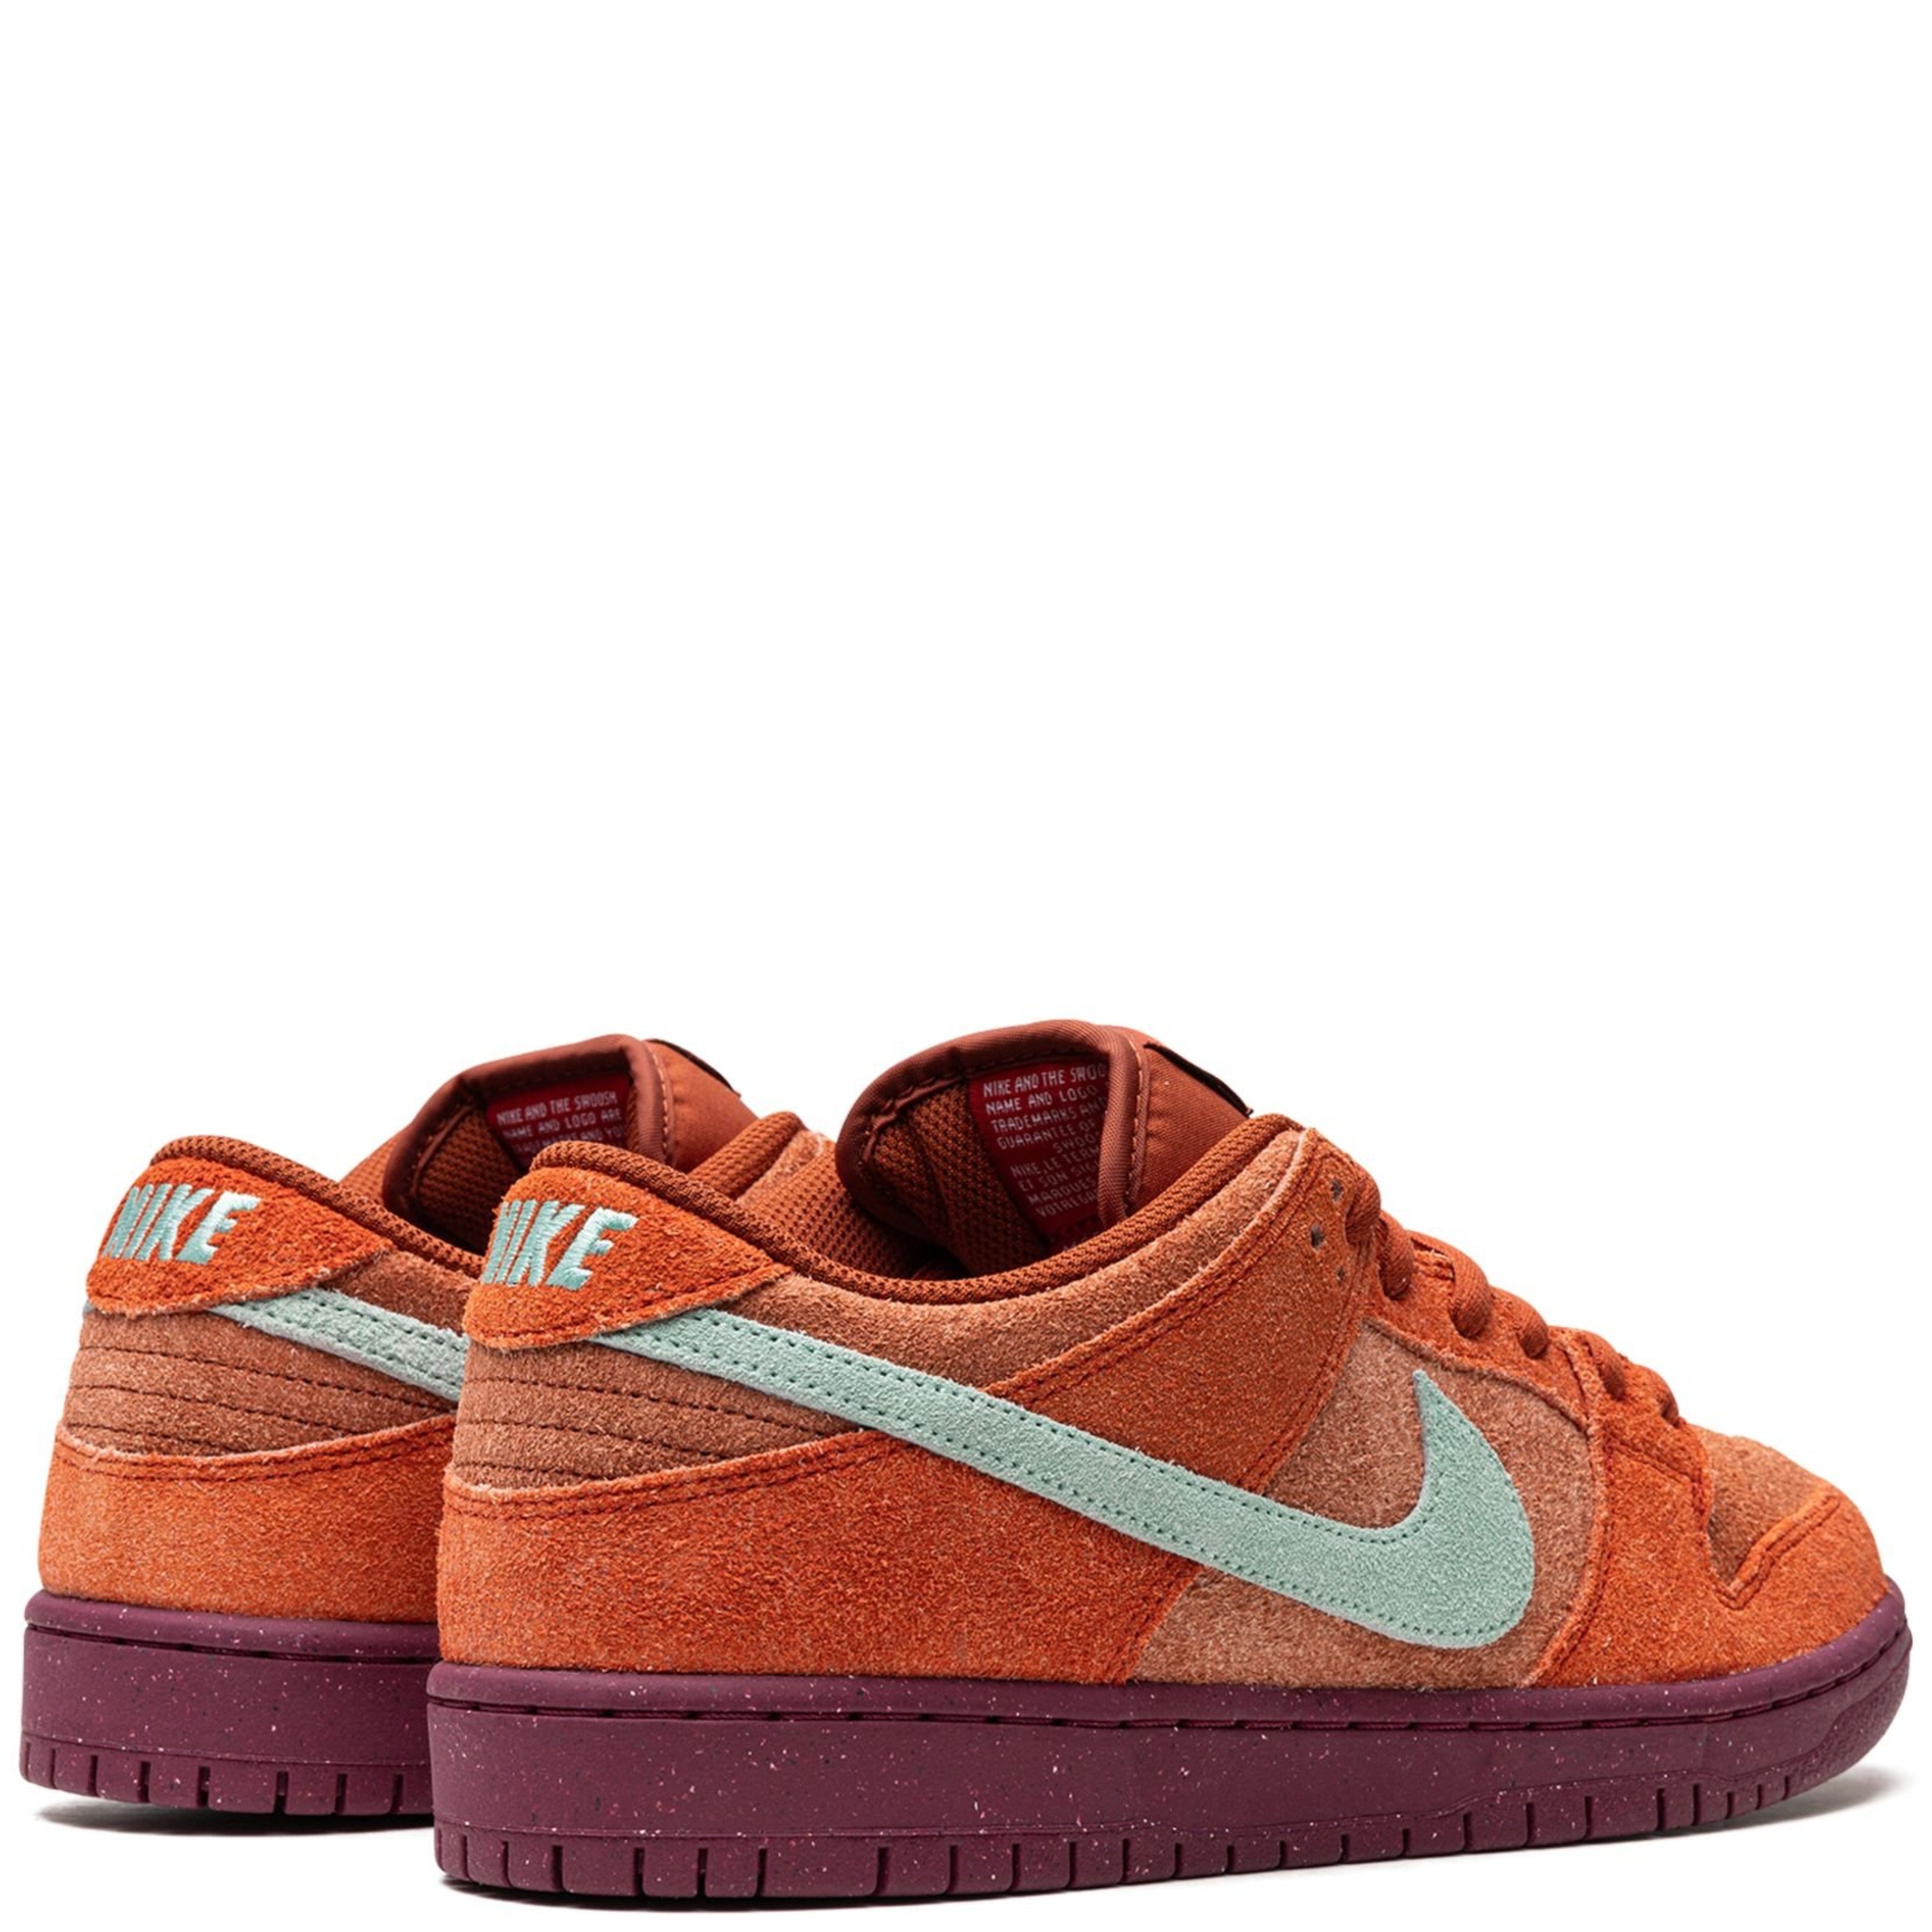 NIKE SB DUNK LOW PRO MYSTIC RED ROSEWOOD